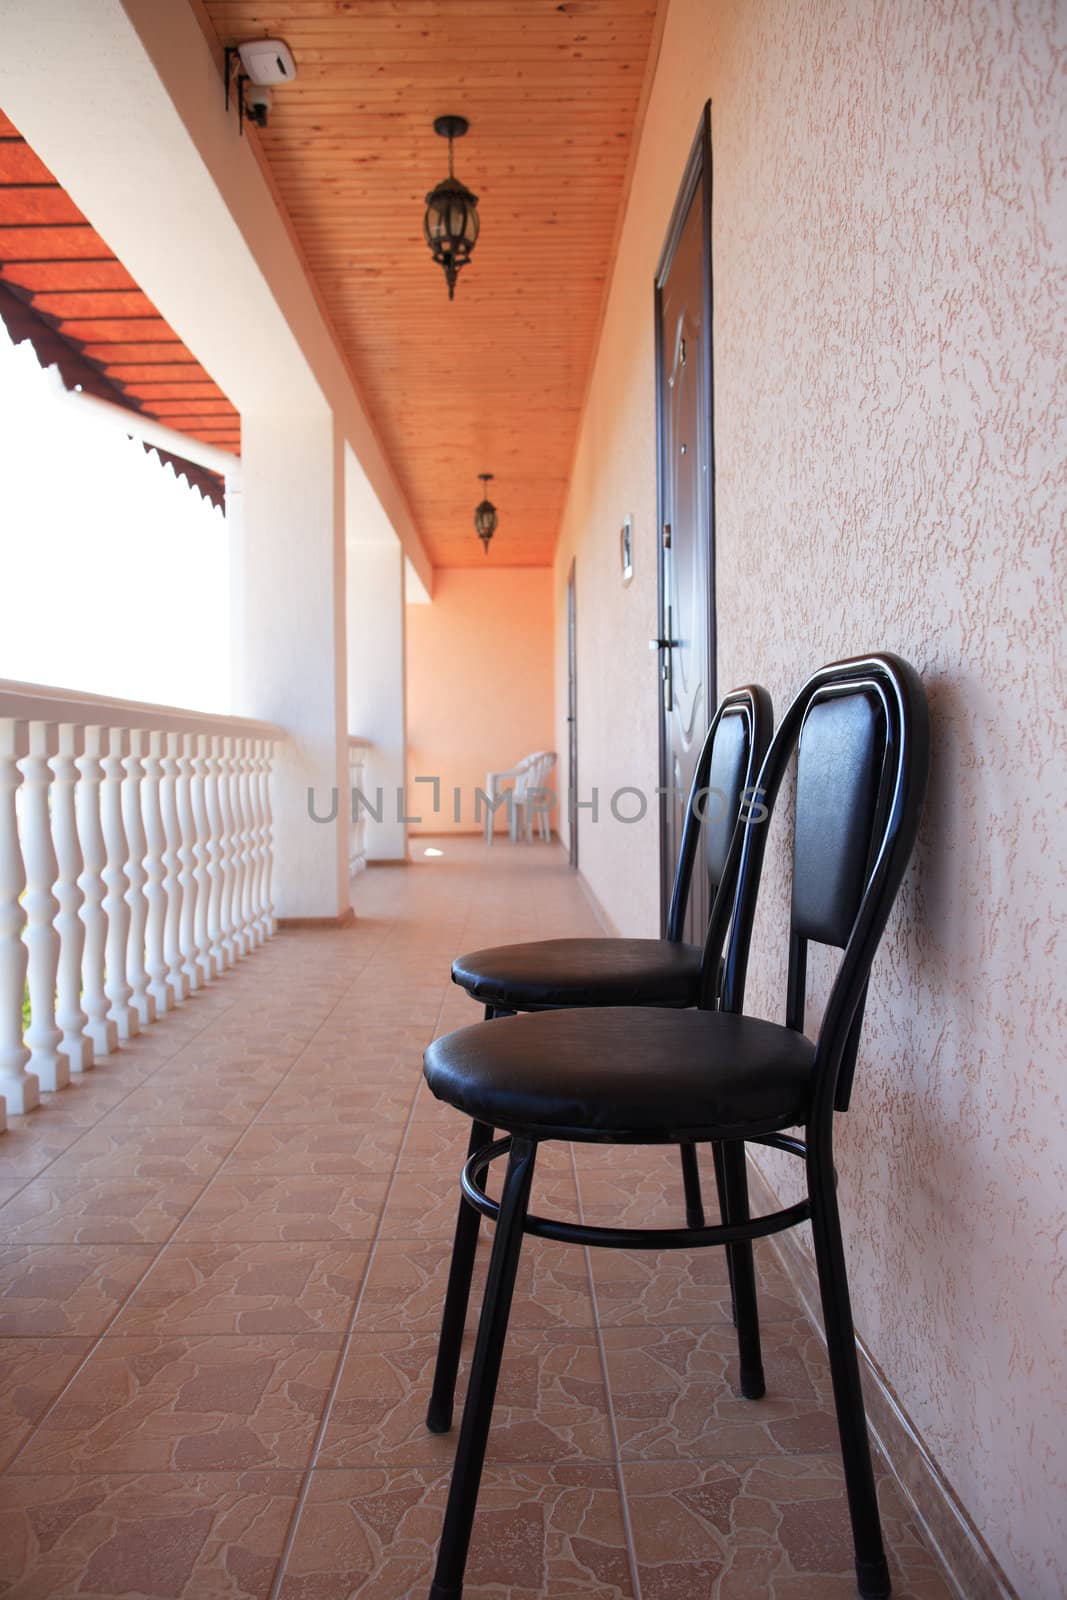 Pair of chairs standing on long terrace with white railing